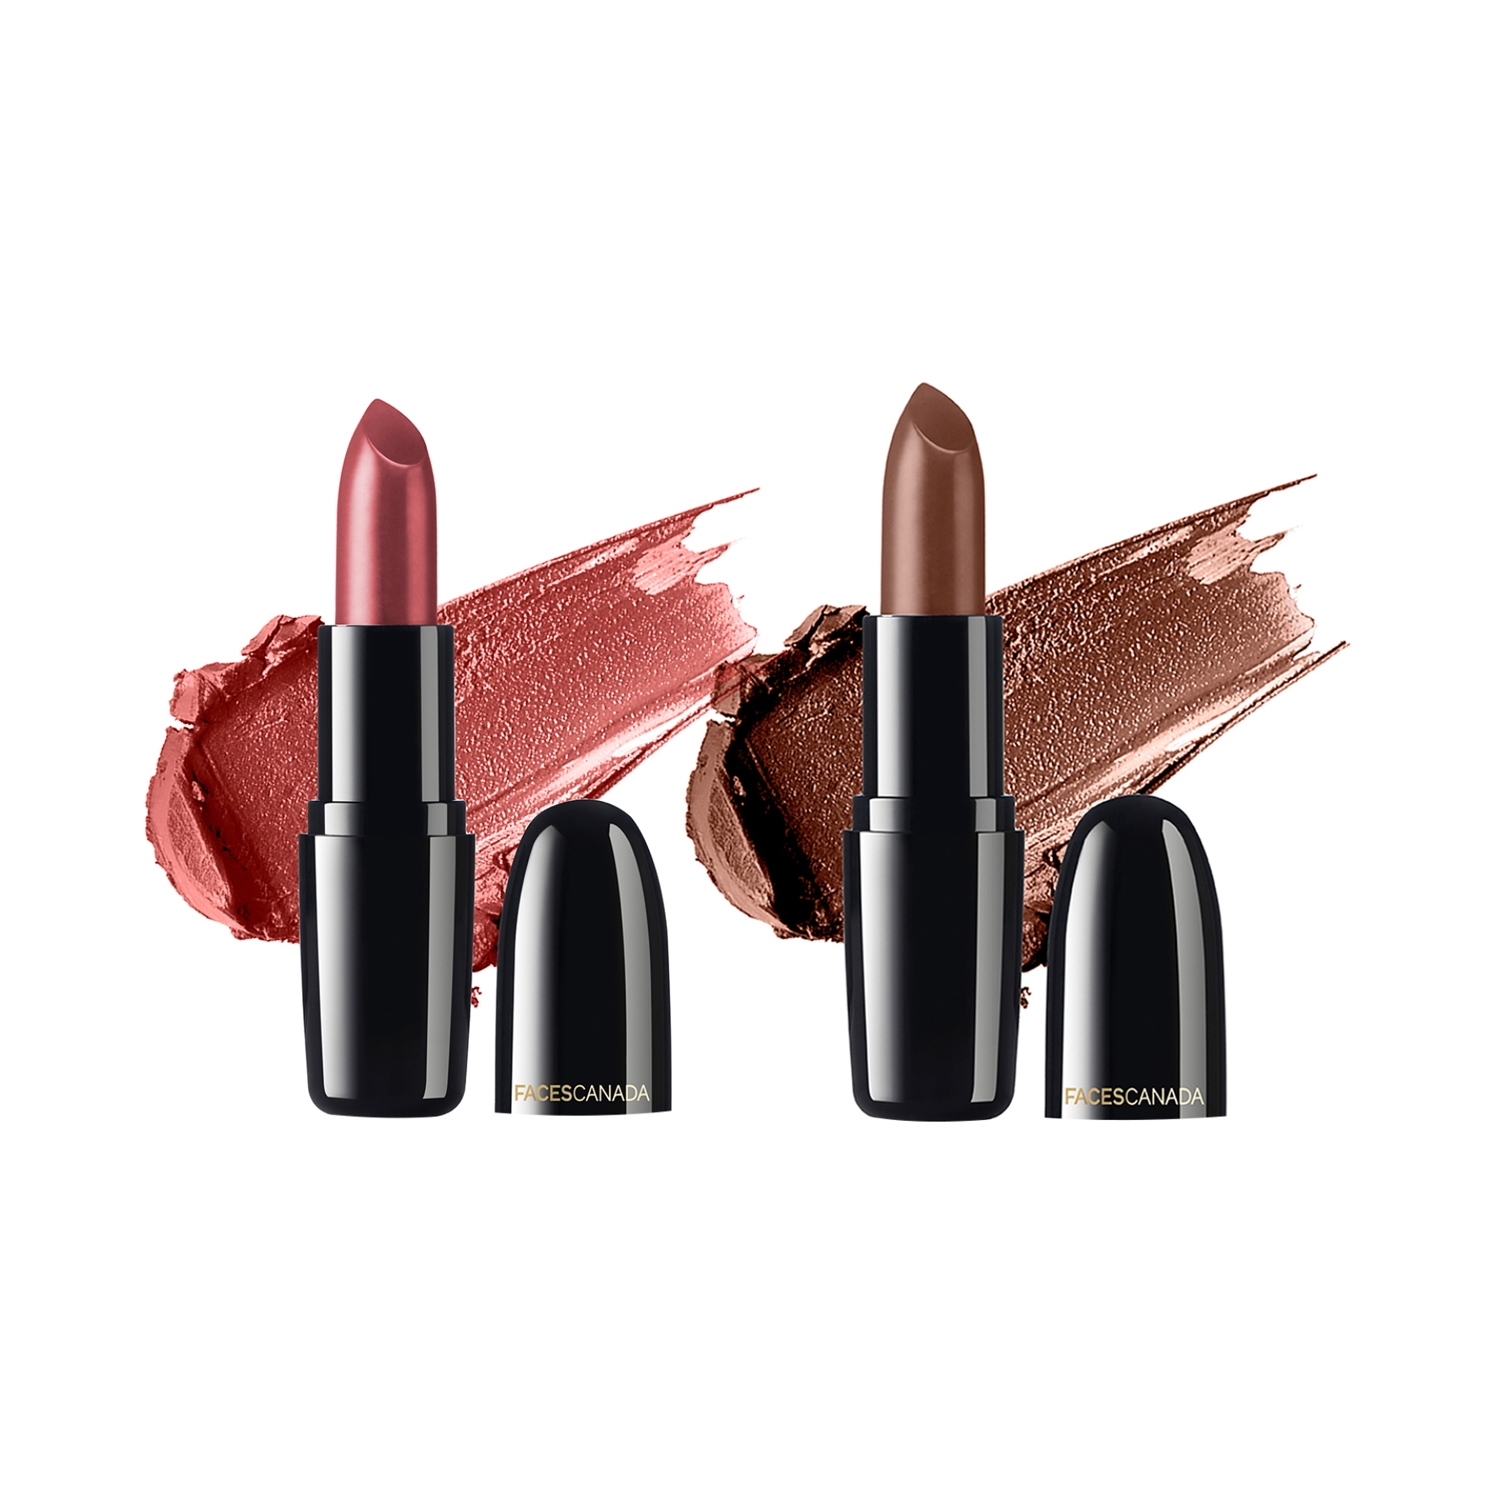 Faces Canada | Faces Canada Festive Pout Weightless Creme Lipstick Combo Pack - Summer Ready, Dark Cocoa (2pcs)